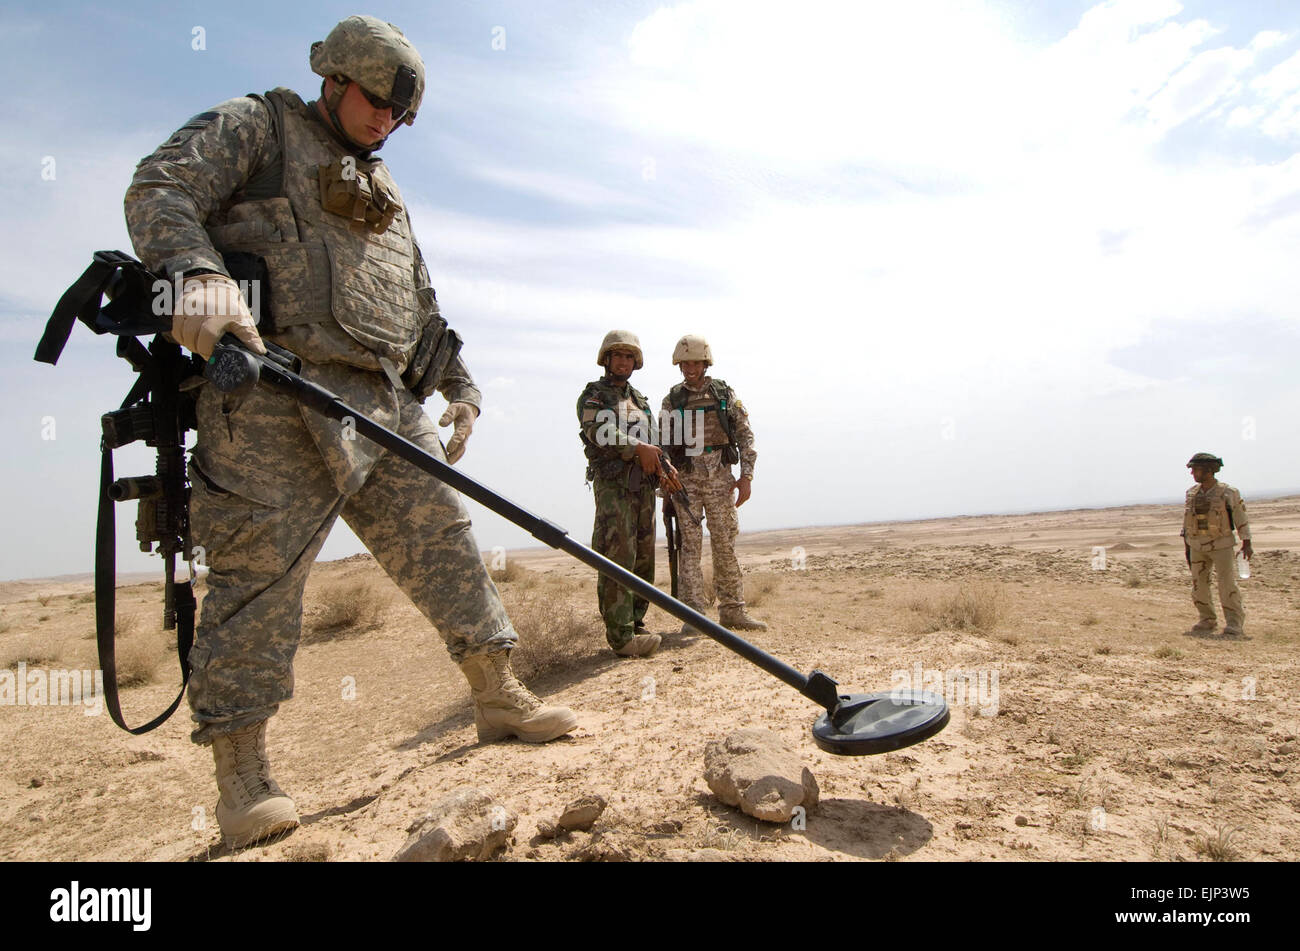 U.S. Army Sgt. Brian Mueller, 1st Battalion, 24th Infantry Regiment, 1st Stryker Brigade Combat Team, 25th Infantry Division, checks a suspicious rock pile with a metal detector during a presence patrol in the area around Albu Sawwat, Iraq, on April 3. Stock Photo